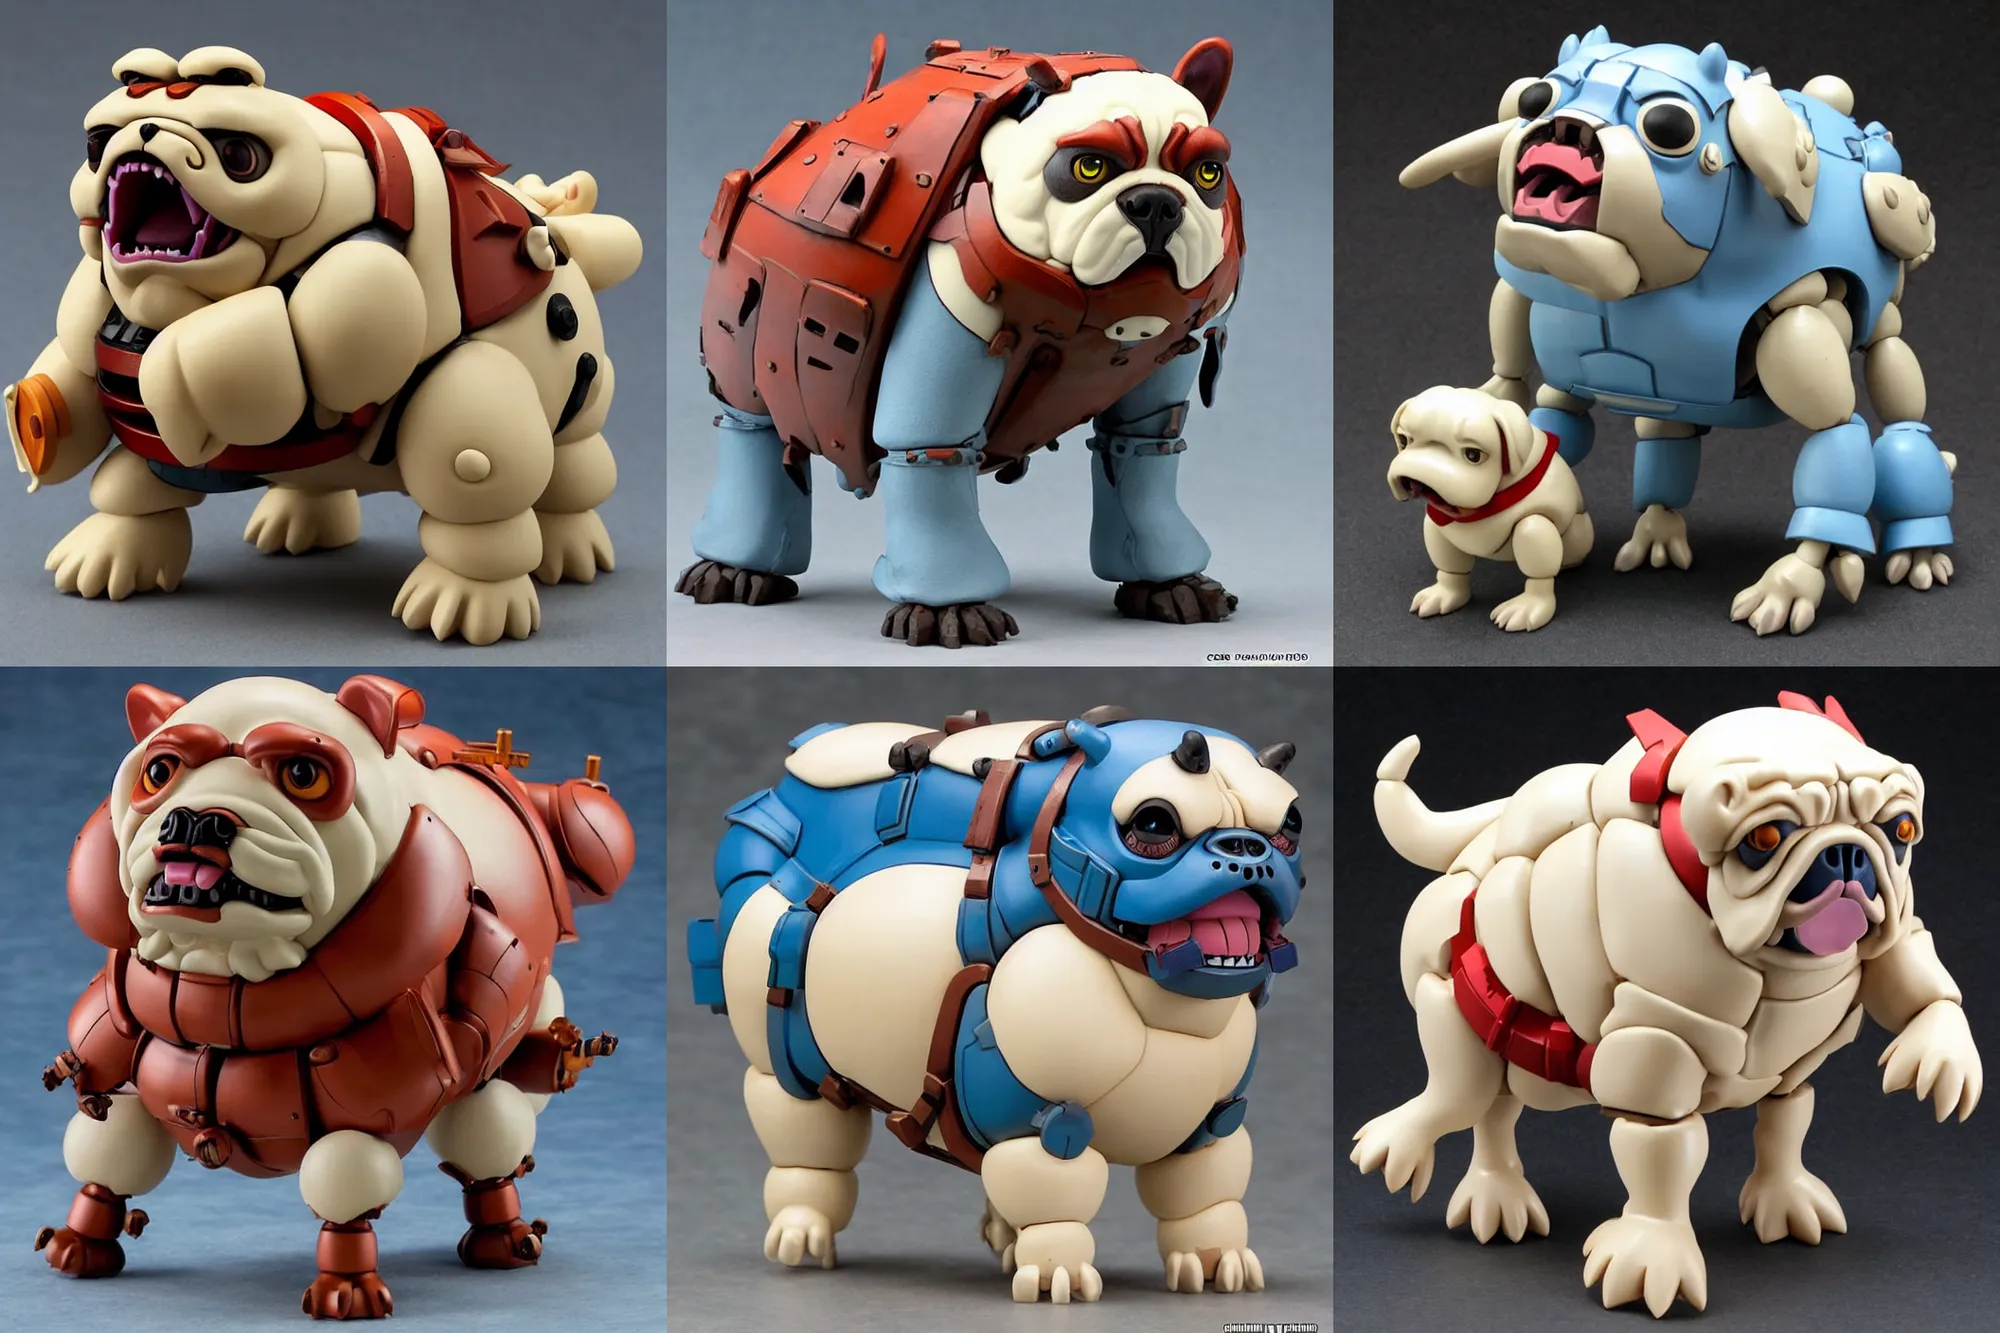 Prompt: A giant mechanized adorable Bulldog from Studio Ghibli Howl's Moving Castle (2004) as a 1980's Kenner style action figure, 5 points of articulation, full body, 4k, highly detailed. award winning sci-fi. look at all that detail!